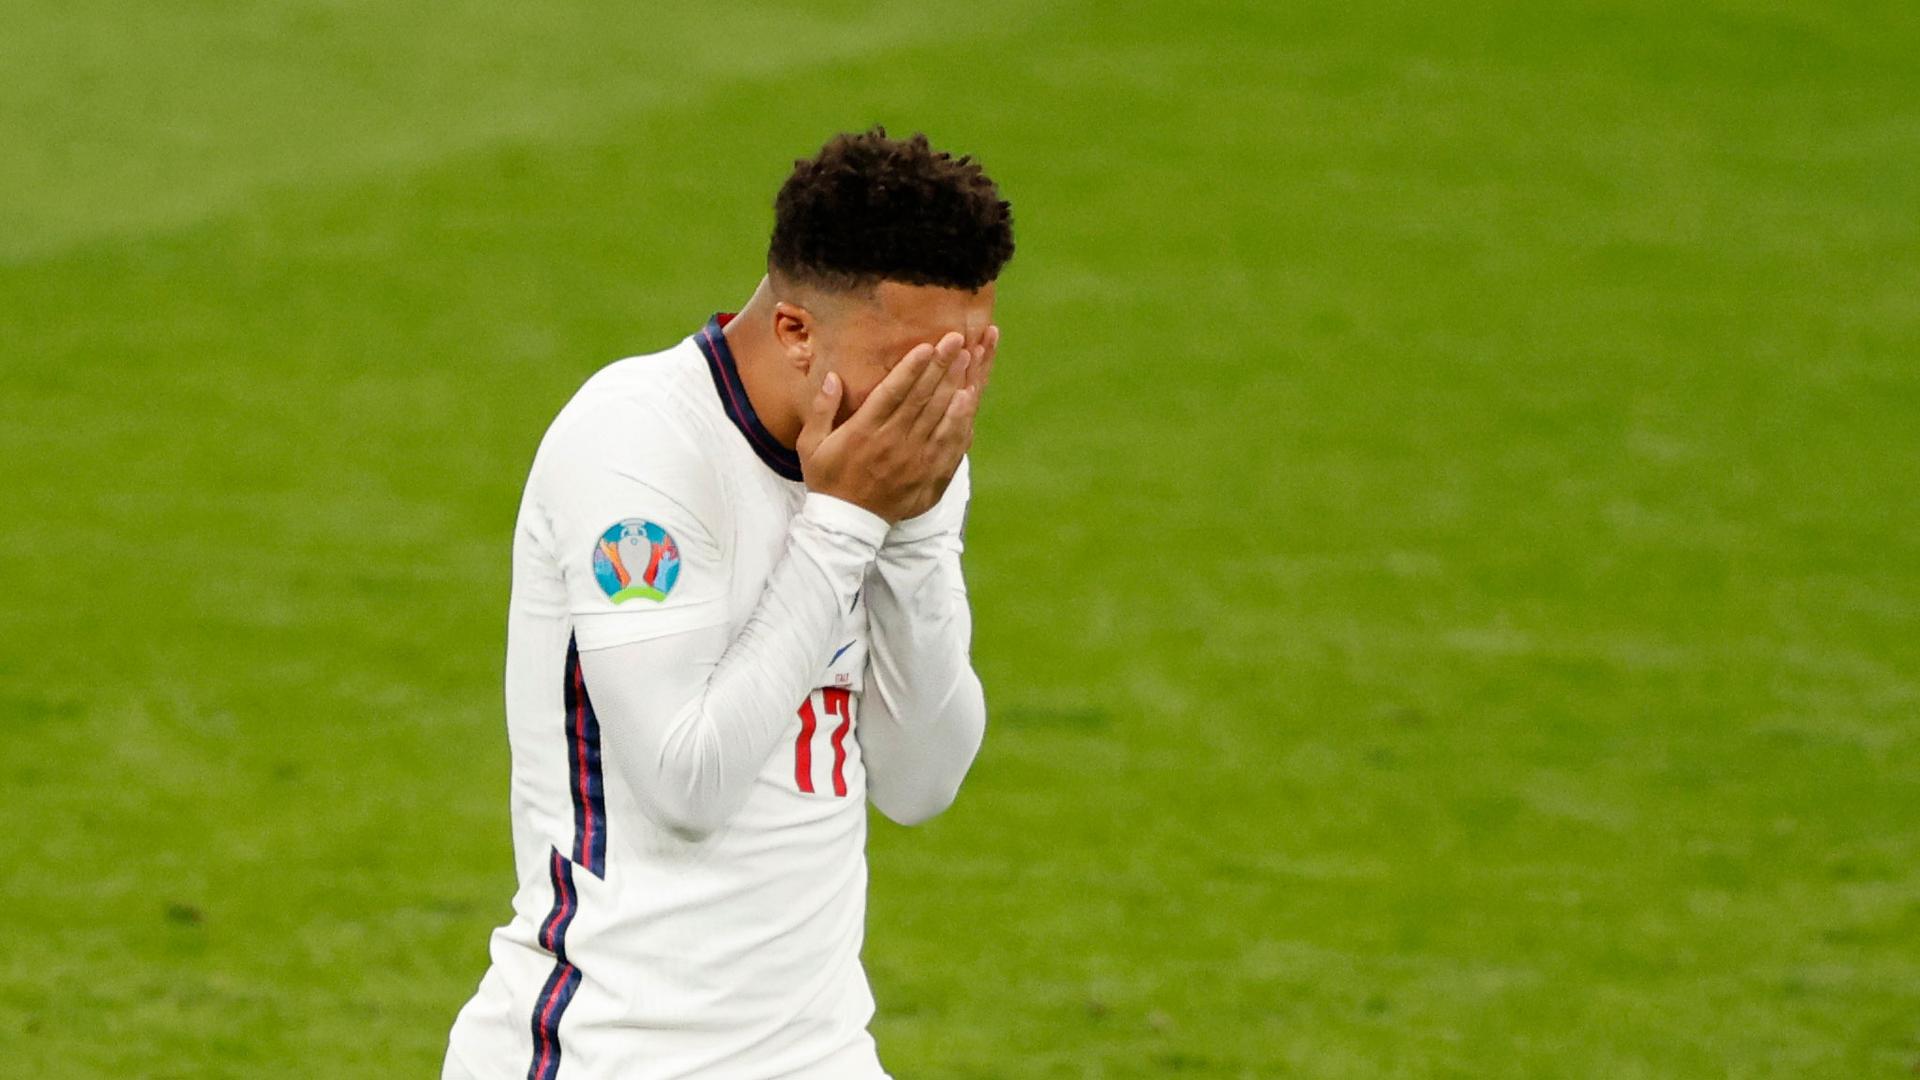 England's Jadon Sancho is shown on the soccer pitch holding his hands to his face.